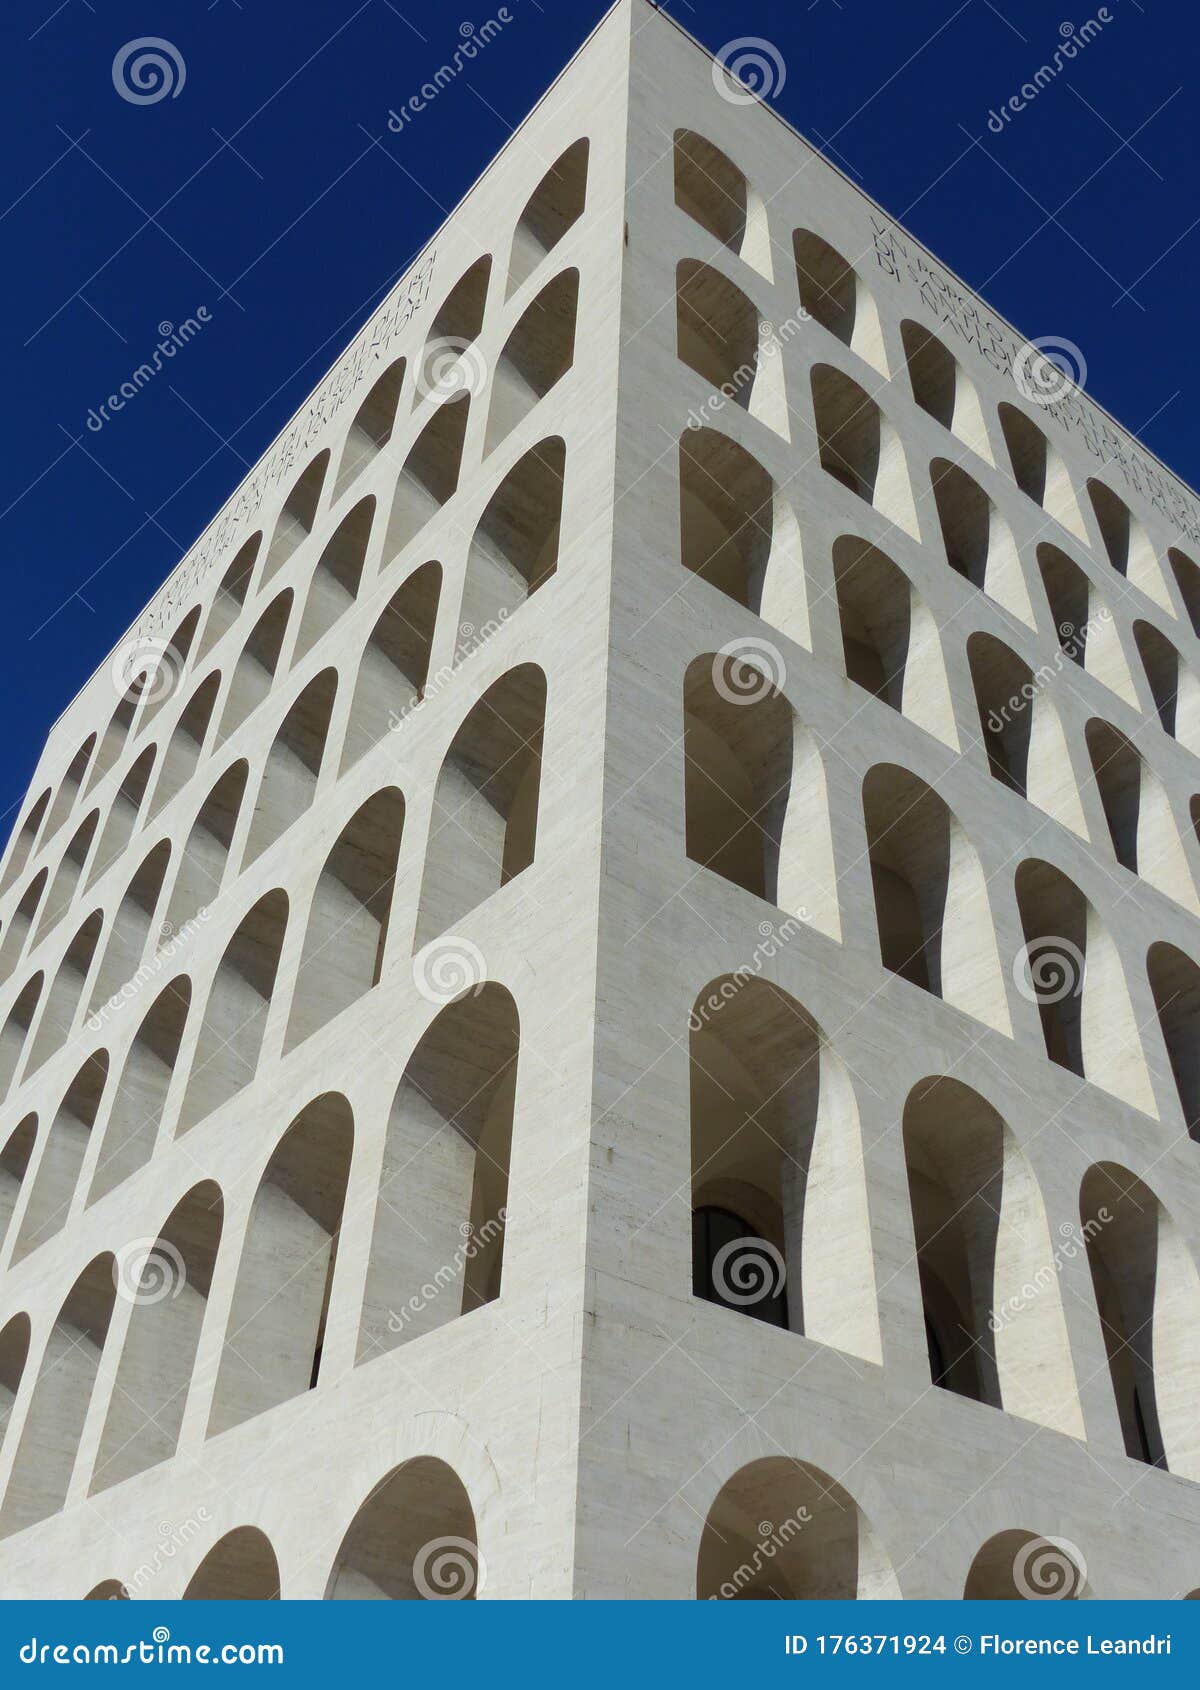 Angle of the Building of the Roman Civilization in the District Eur To ...